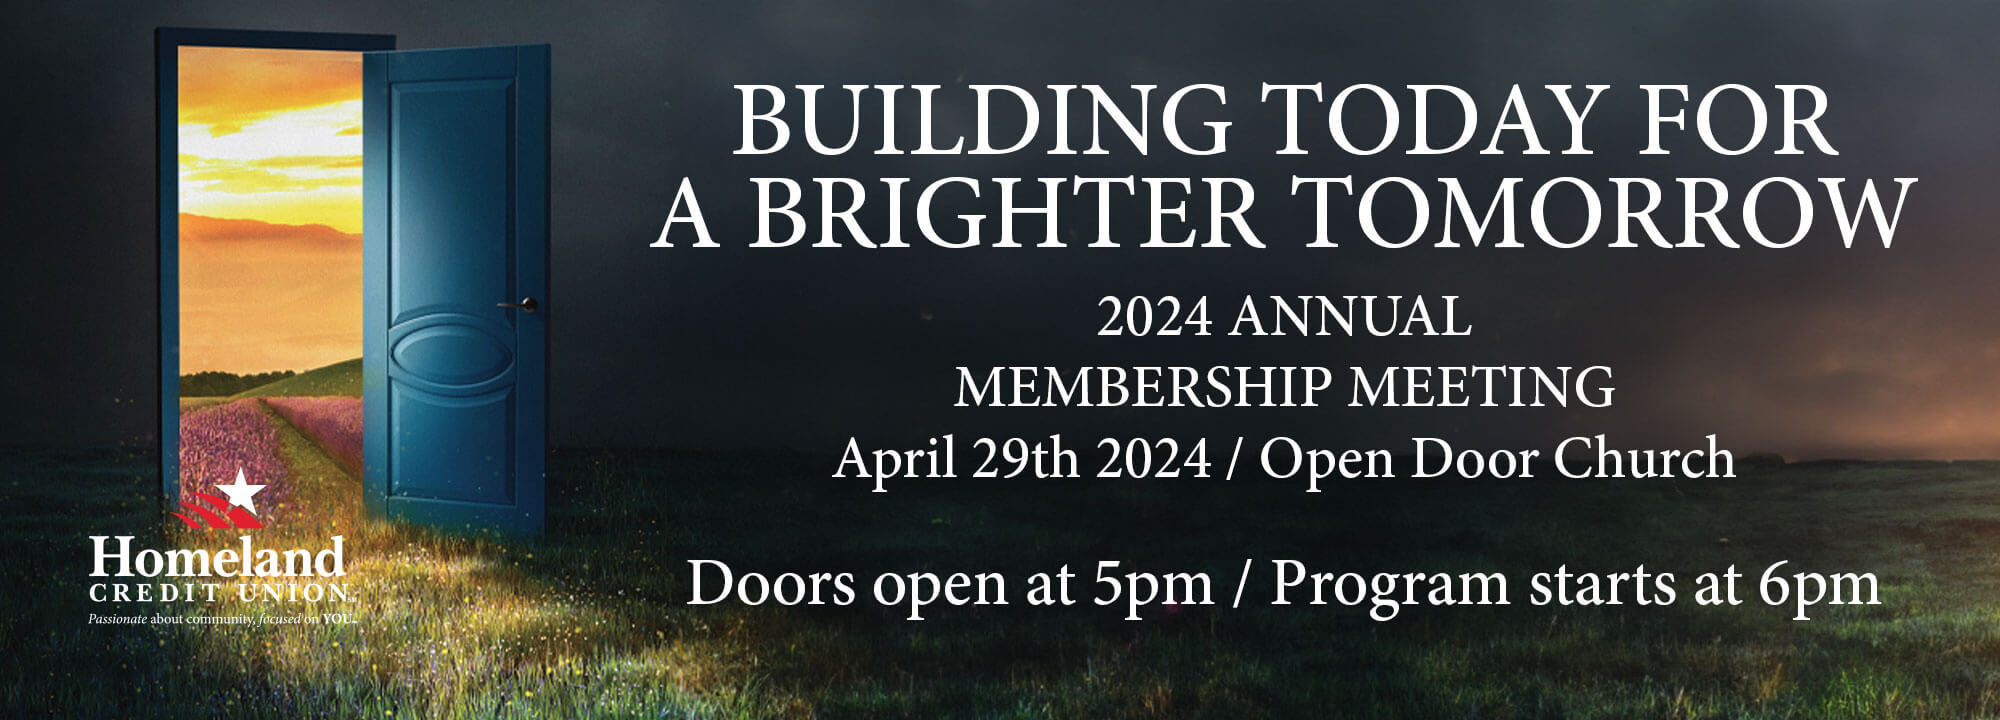 Building today for a brighter tomorrow. 2024 Annual Membership Meeting. April 29th 2024. Open Door Church. Doors open at 5pm. Program starts at 6pm.